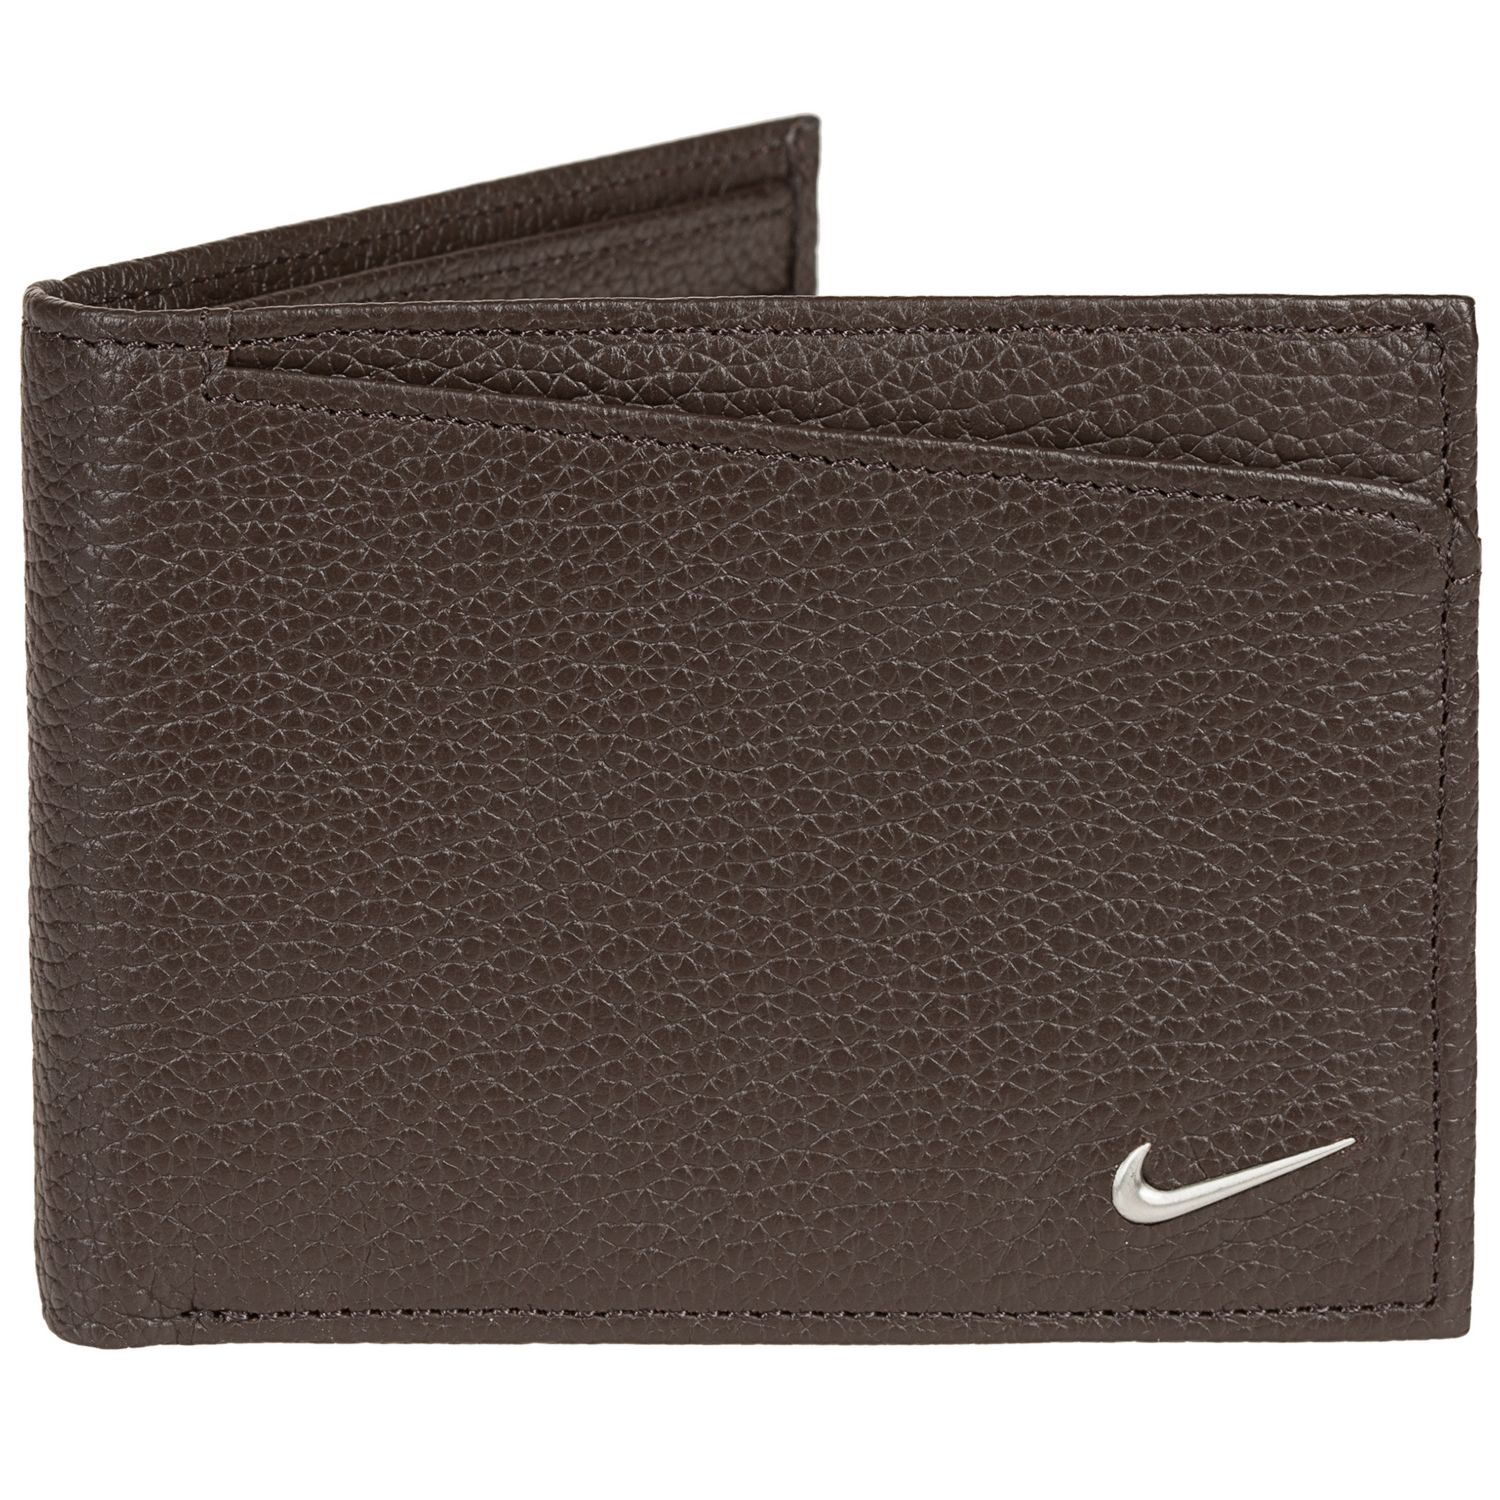 Nike Leather Passcase Wallet, Brown 